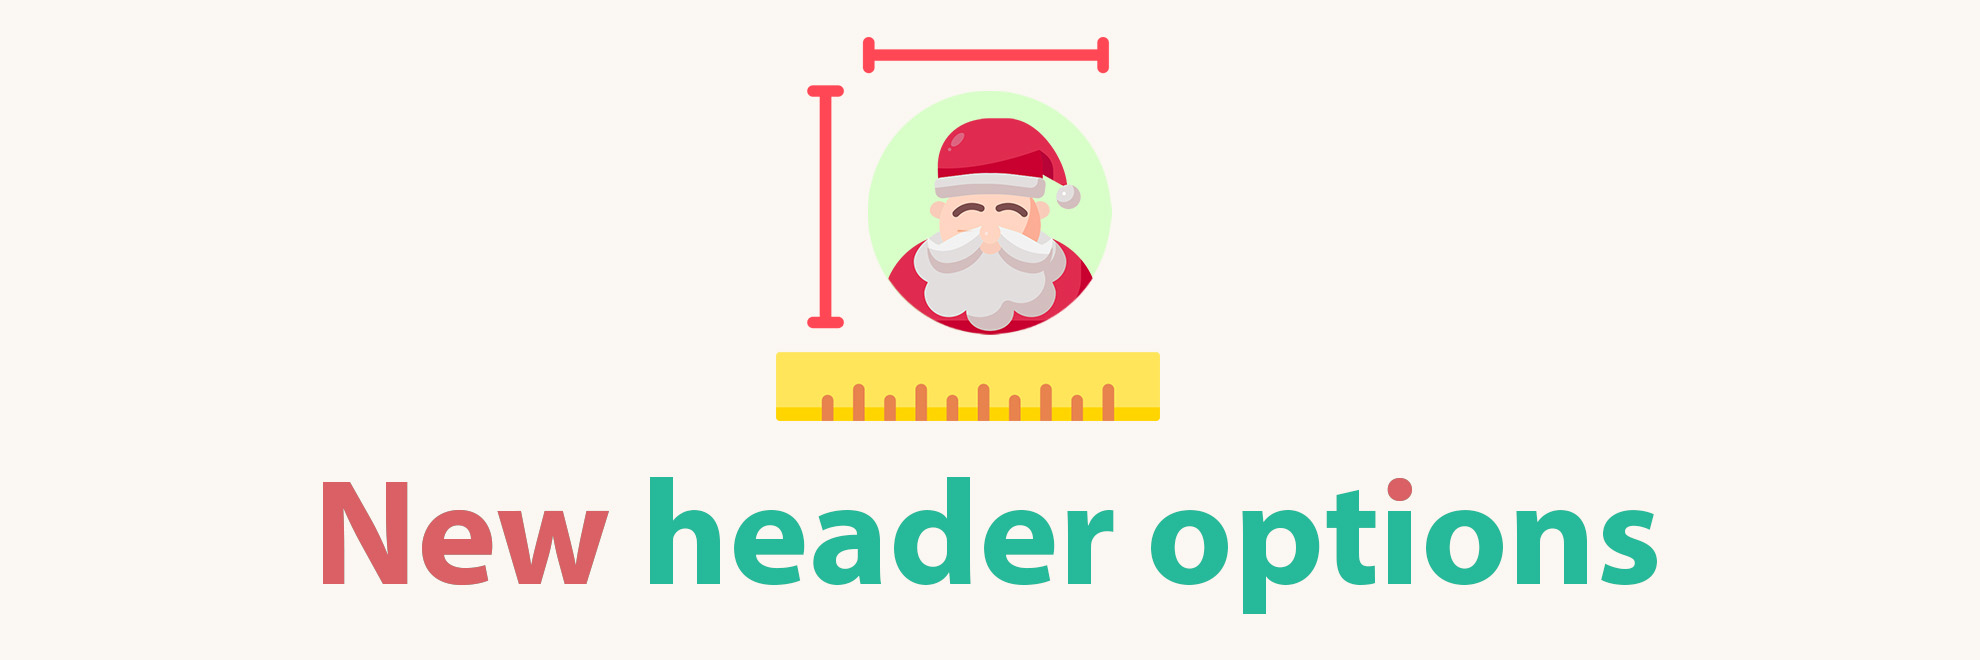 Illustration showing Santa Claus profile photo with the resizing measured and the new header options caption.